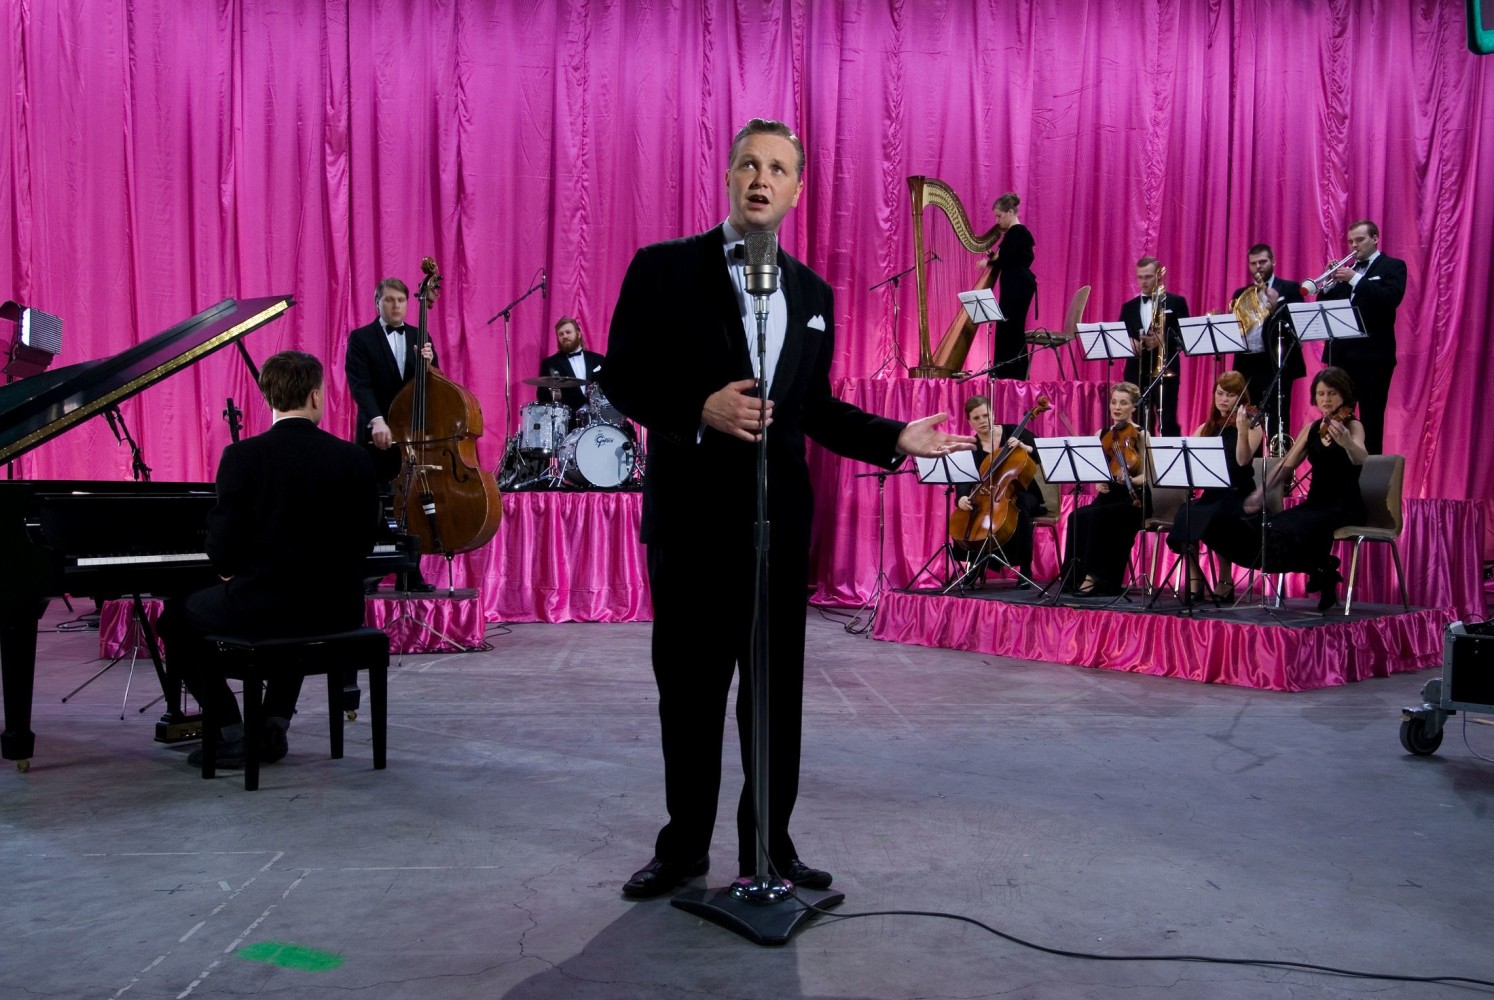 Ragnar Kjartansson
God, 2007&amp;nbsp;
Single-channel video, with pink curtains
Duration: 30 minutes&amp;nbsp;
Music by Dav&amp;iacute;&amp;eth; &amp;THORN;&amp;oacute;r J&amp;oacute;nsson and Ragnar Kjartansson
Commissioned by Thyssen-Bornemisza Art Contemporary, Vienna and The Living Art Museum, Reykjav&amp;iacute;k
Photo: Rafael Pinho